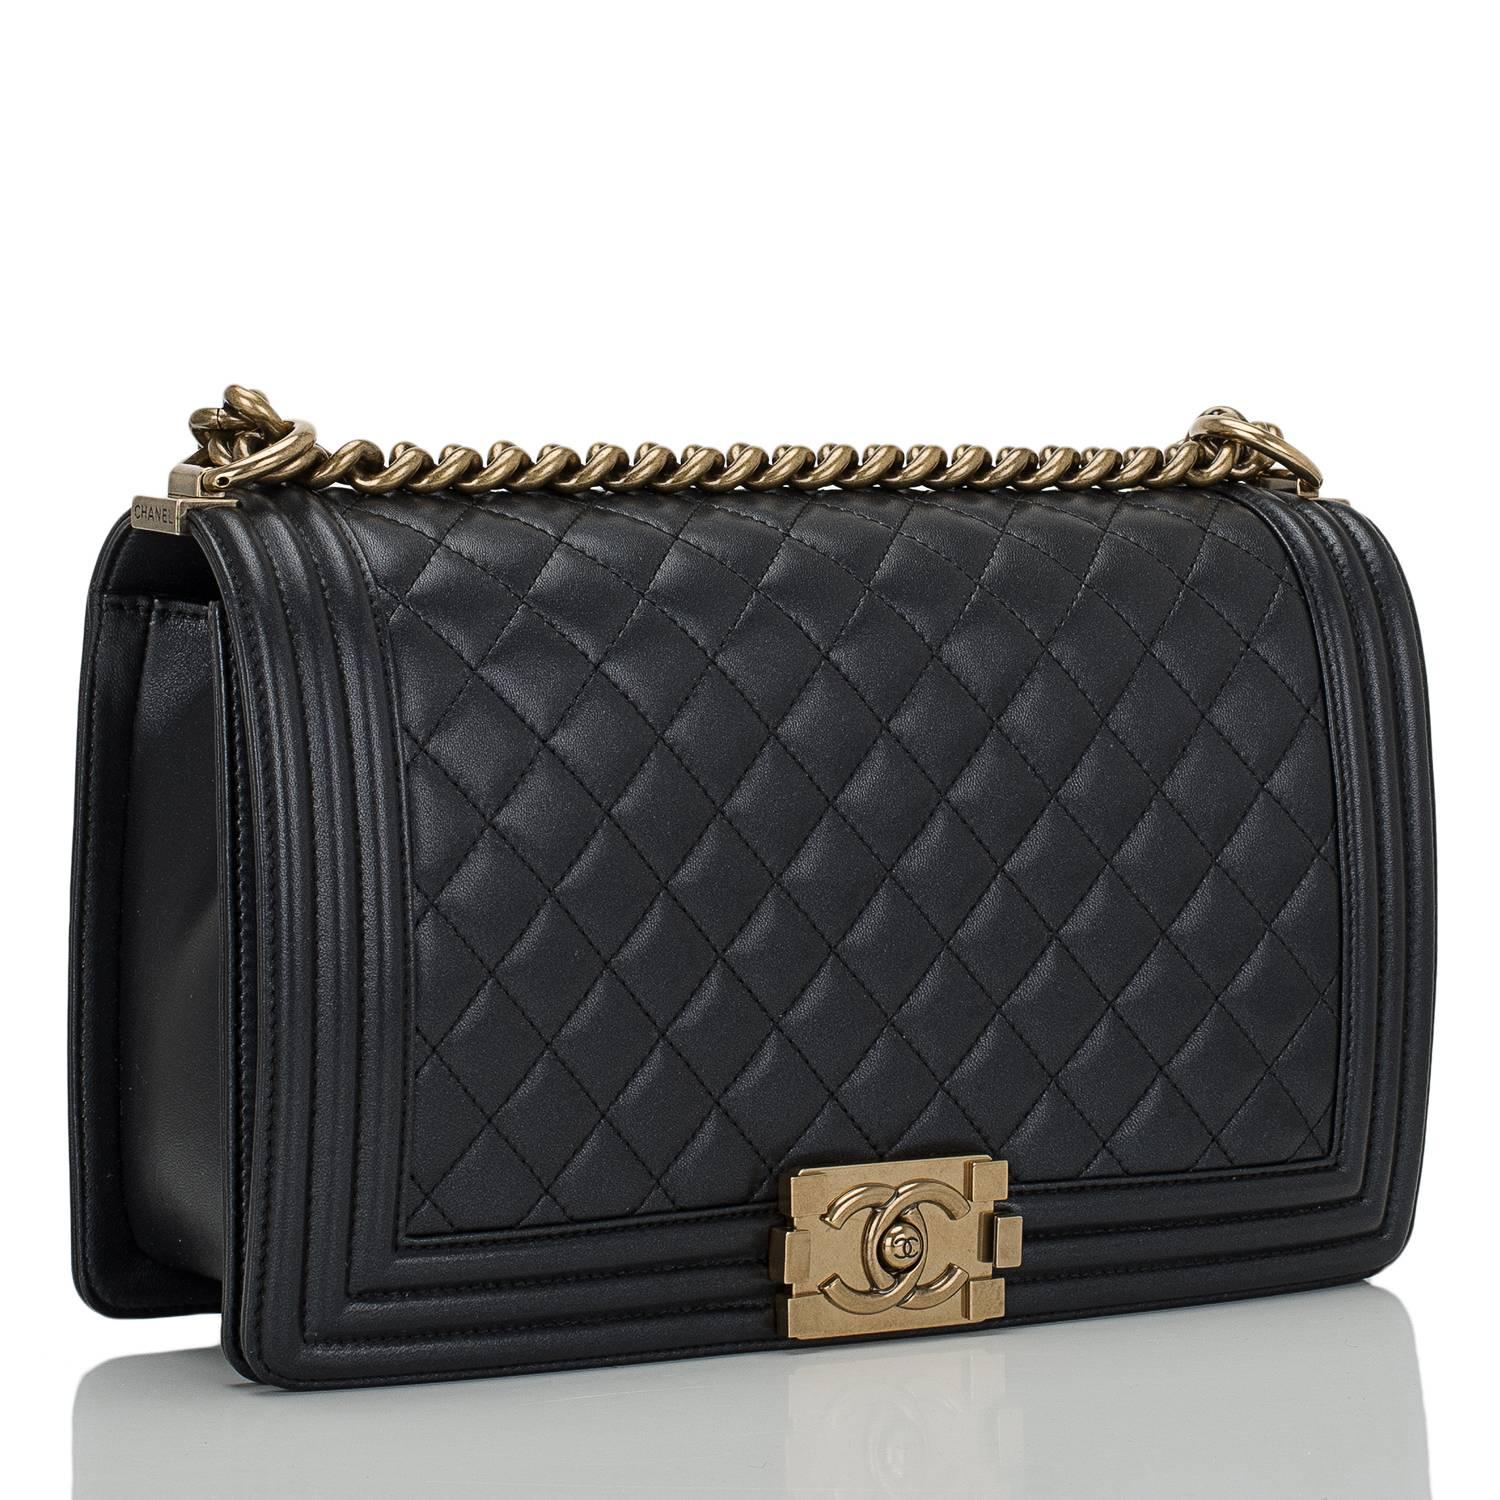 This Chanel Large Boy bag is made of lightly pearlized black lambskin leather and accented with antique gold tone hardware.

The bag features quilted leather trims in smooth calfskin, a full front flap with the Boy signature CC push lock closure,